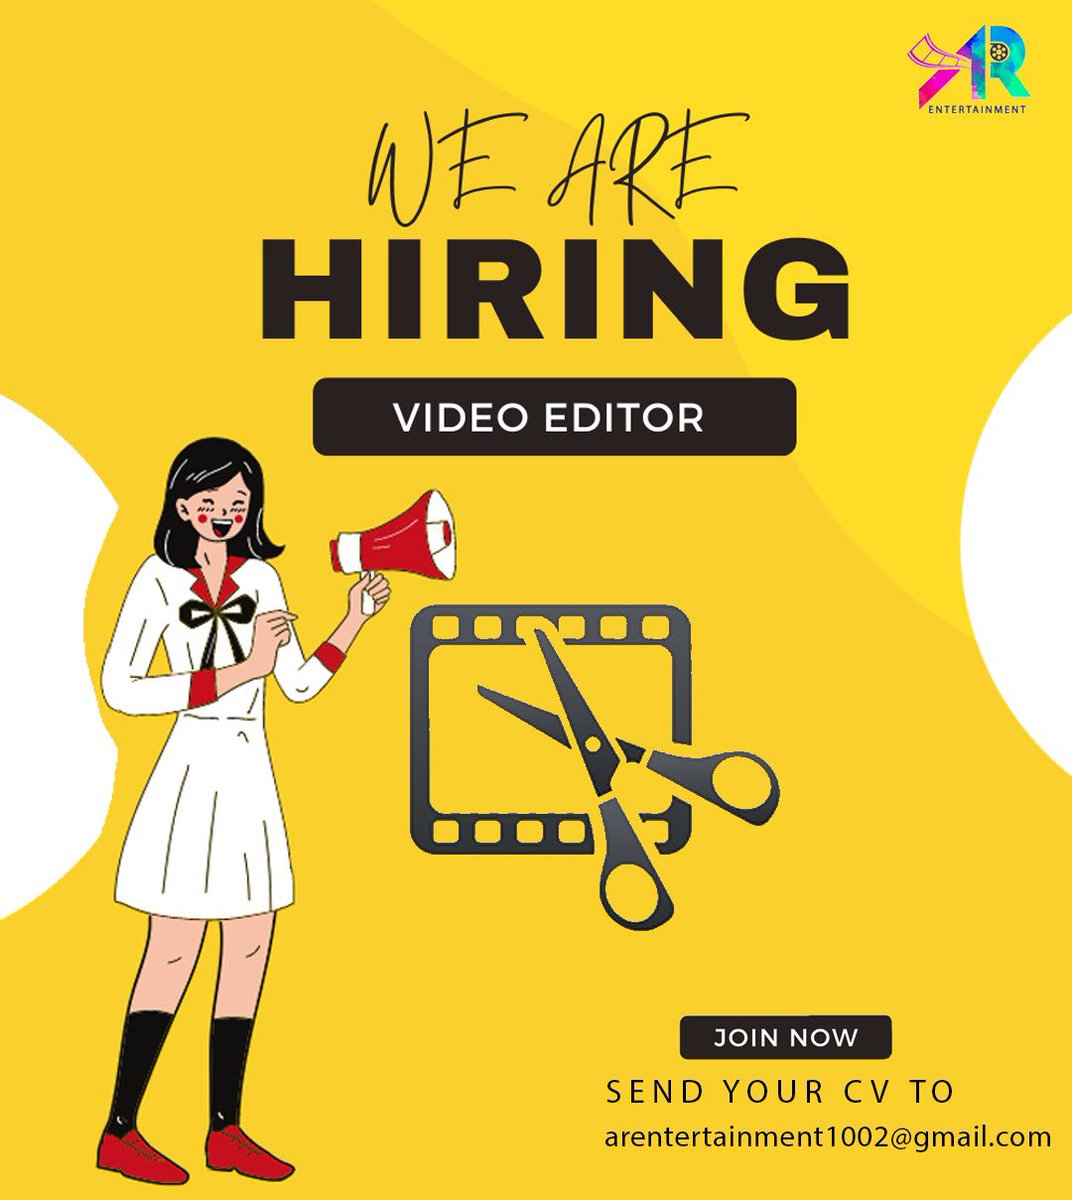 We're HIRING 'Video Editor' to join our dynamic team! Location: Chennai Send your cv to arentertainment1002@gmail.com ✉️ #JobsOpening #Hiring #Editor